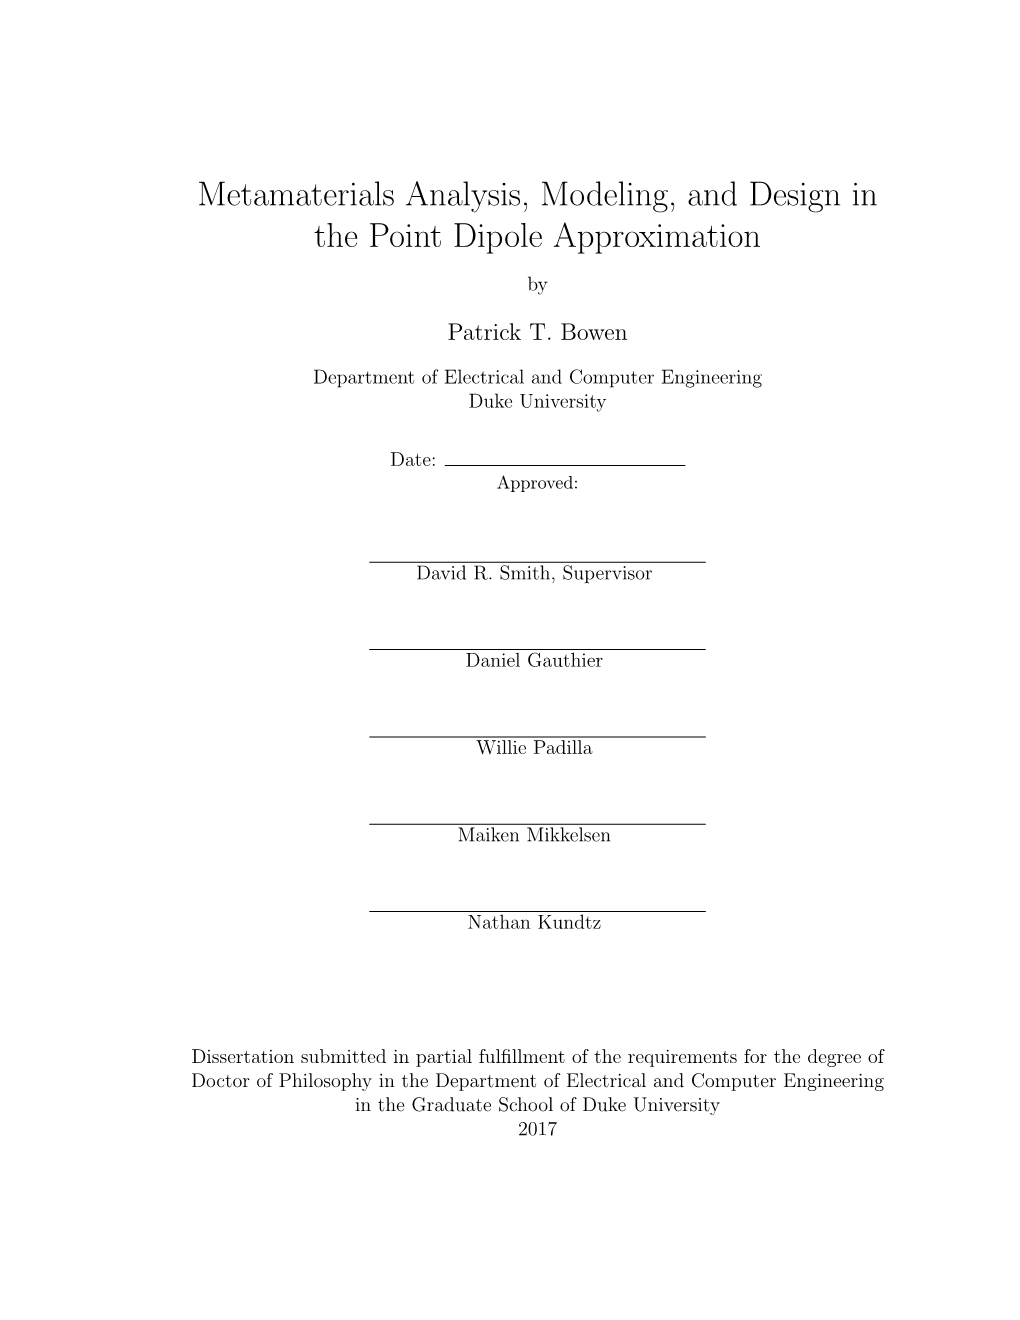 Metamaterials Analysis, Modeling, and Design in the Point Dipole Approximation